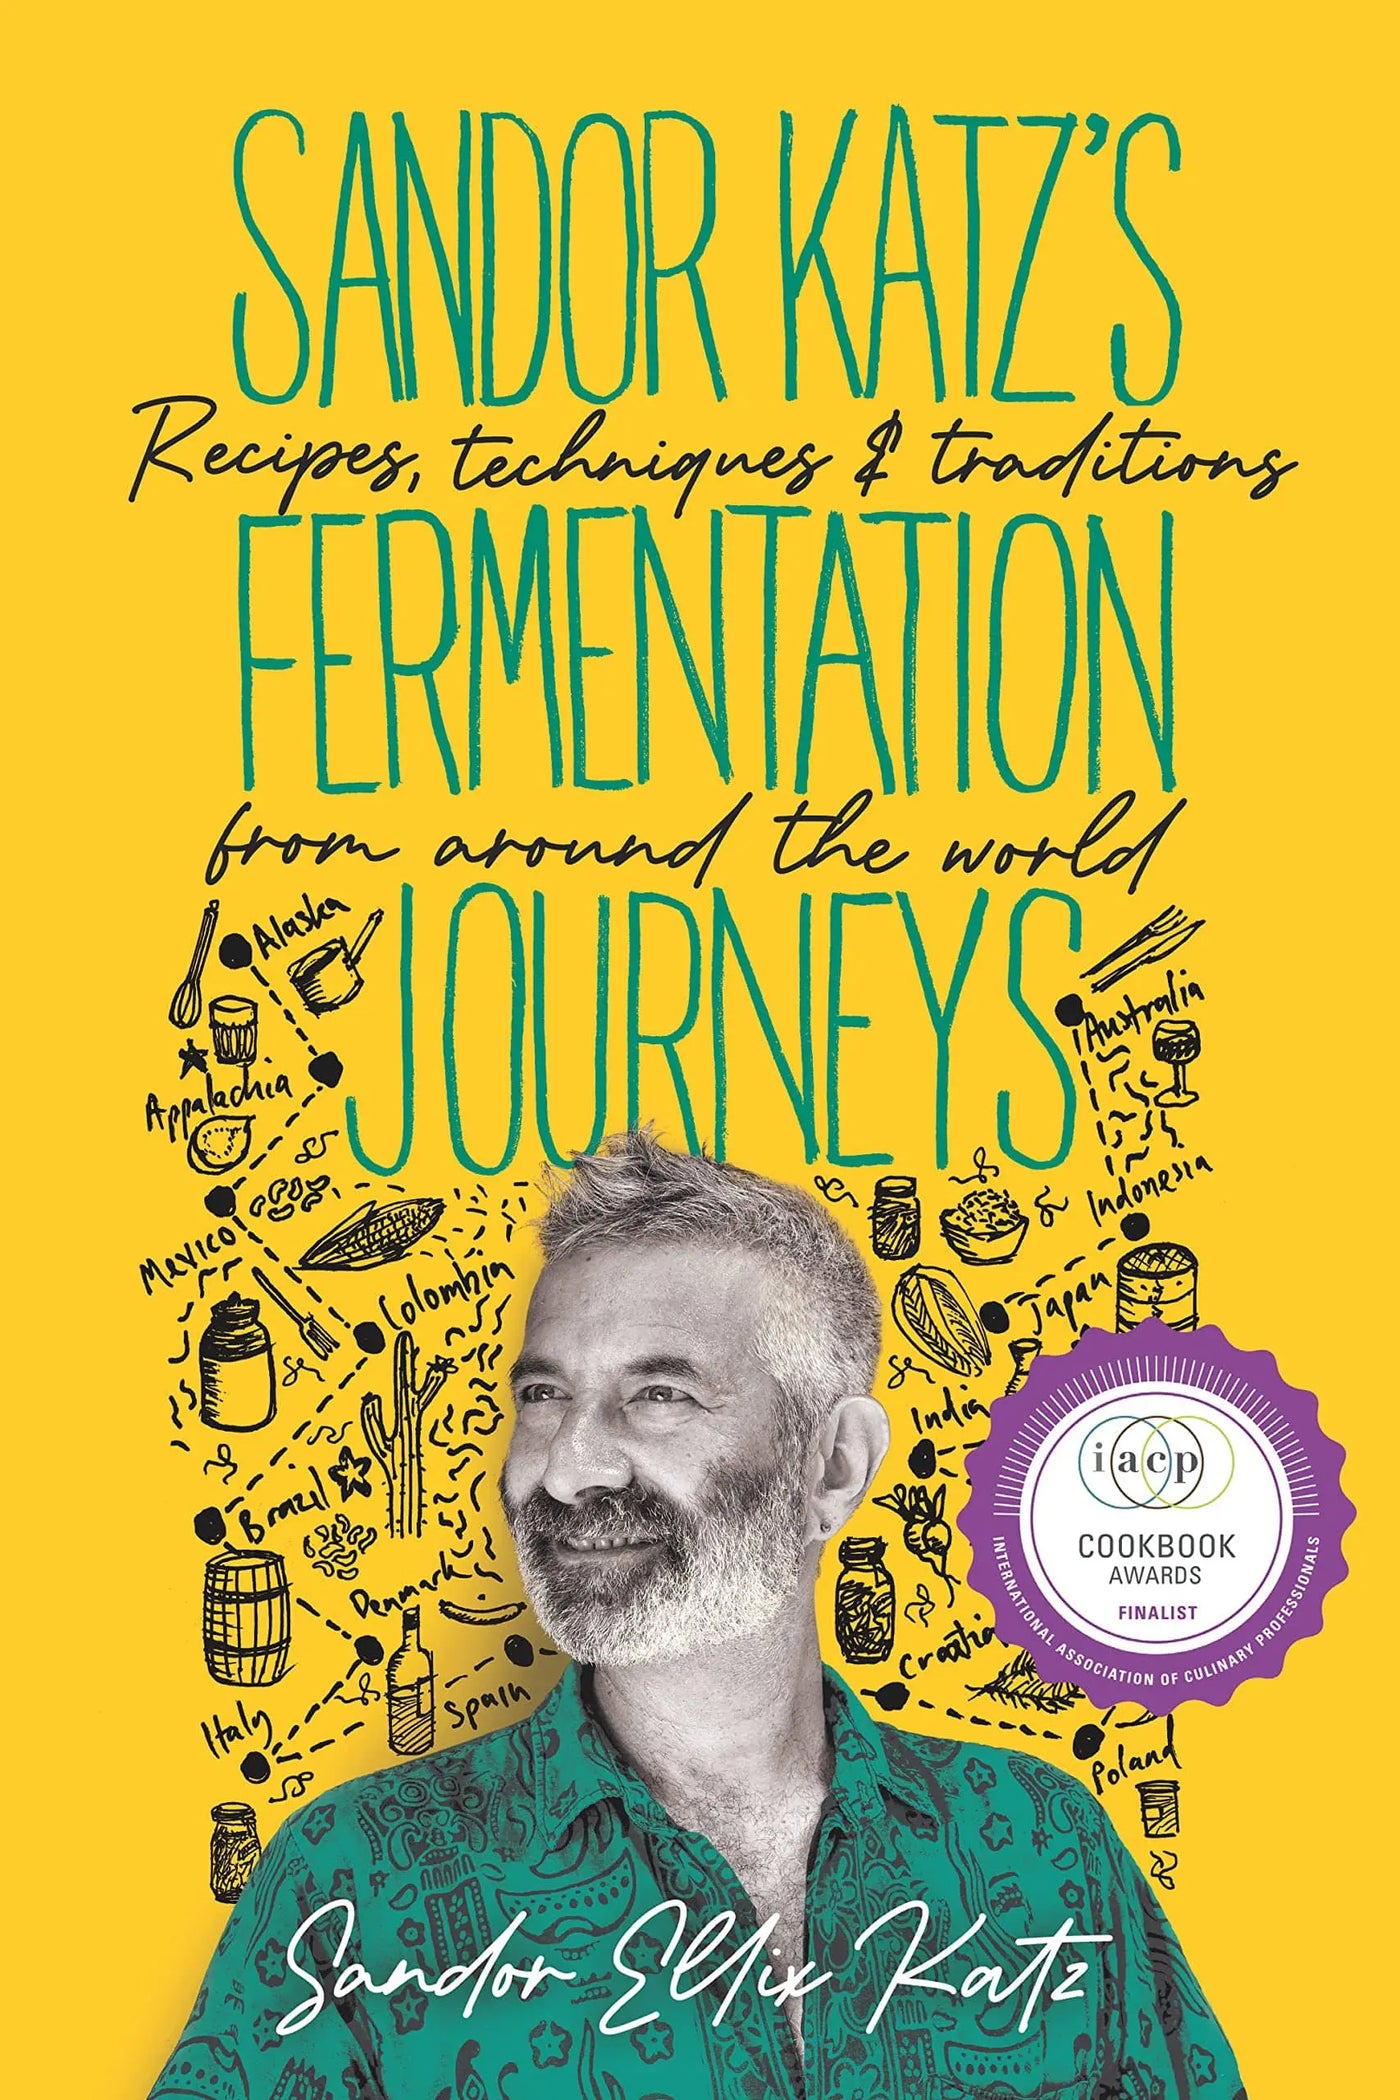 Sandor Katz’s Fermentation Journeys: Recipes, Techniques, and Traditions from around the World Hardcover - Migration Museum Shop